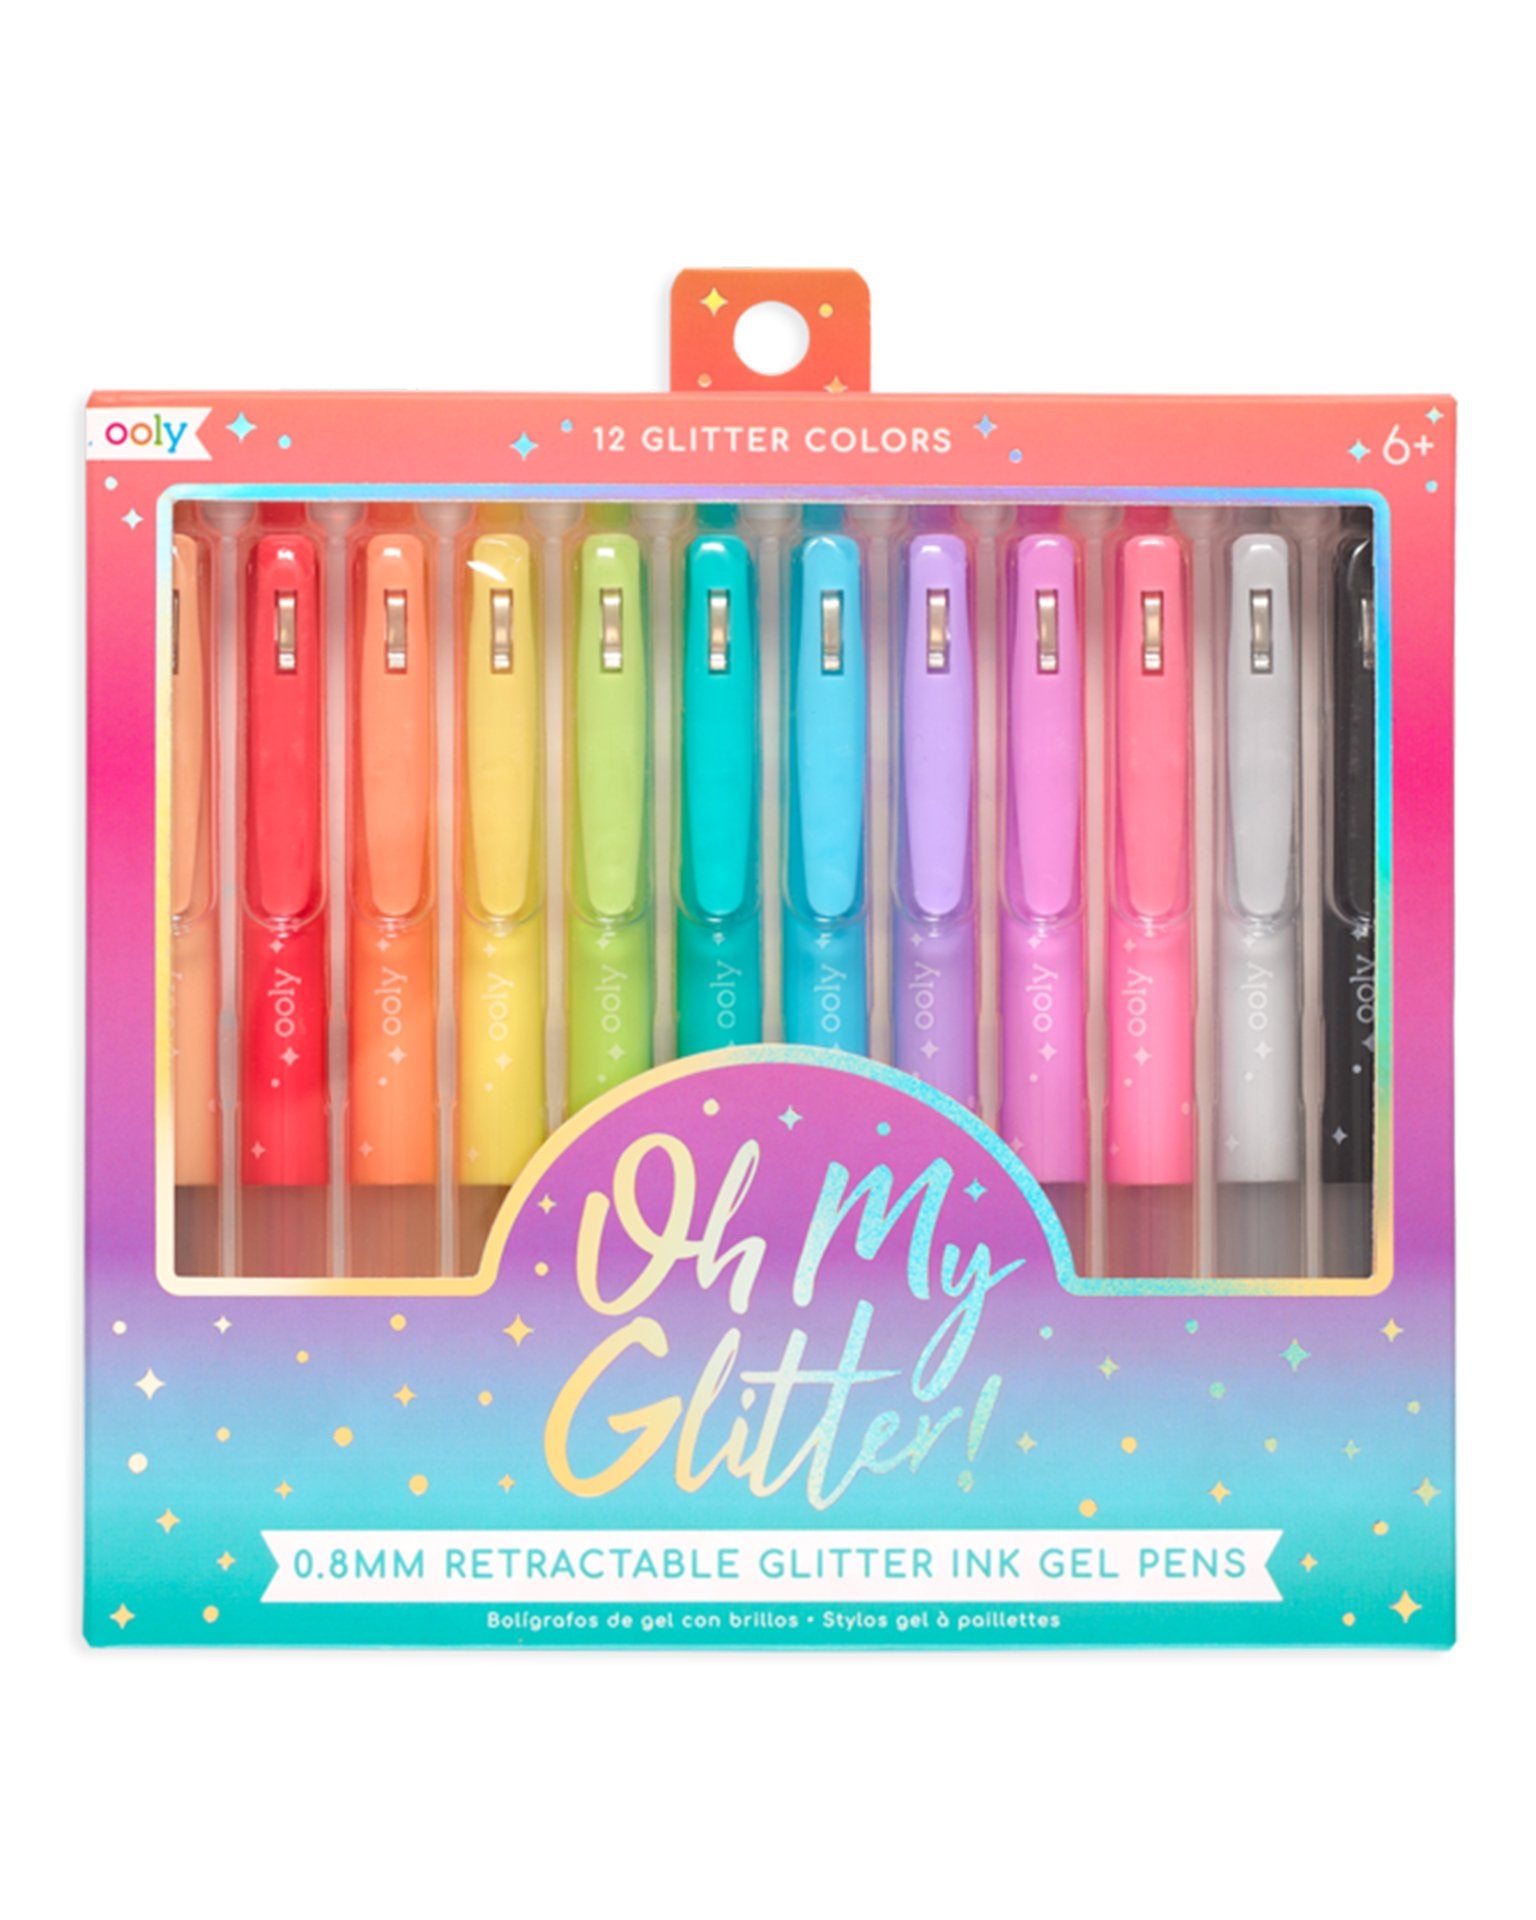 Little ooly play oh my glitter! gel pens set of 12